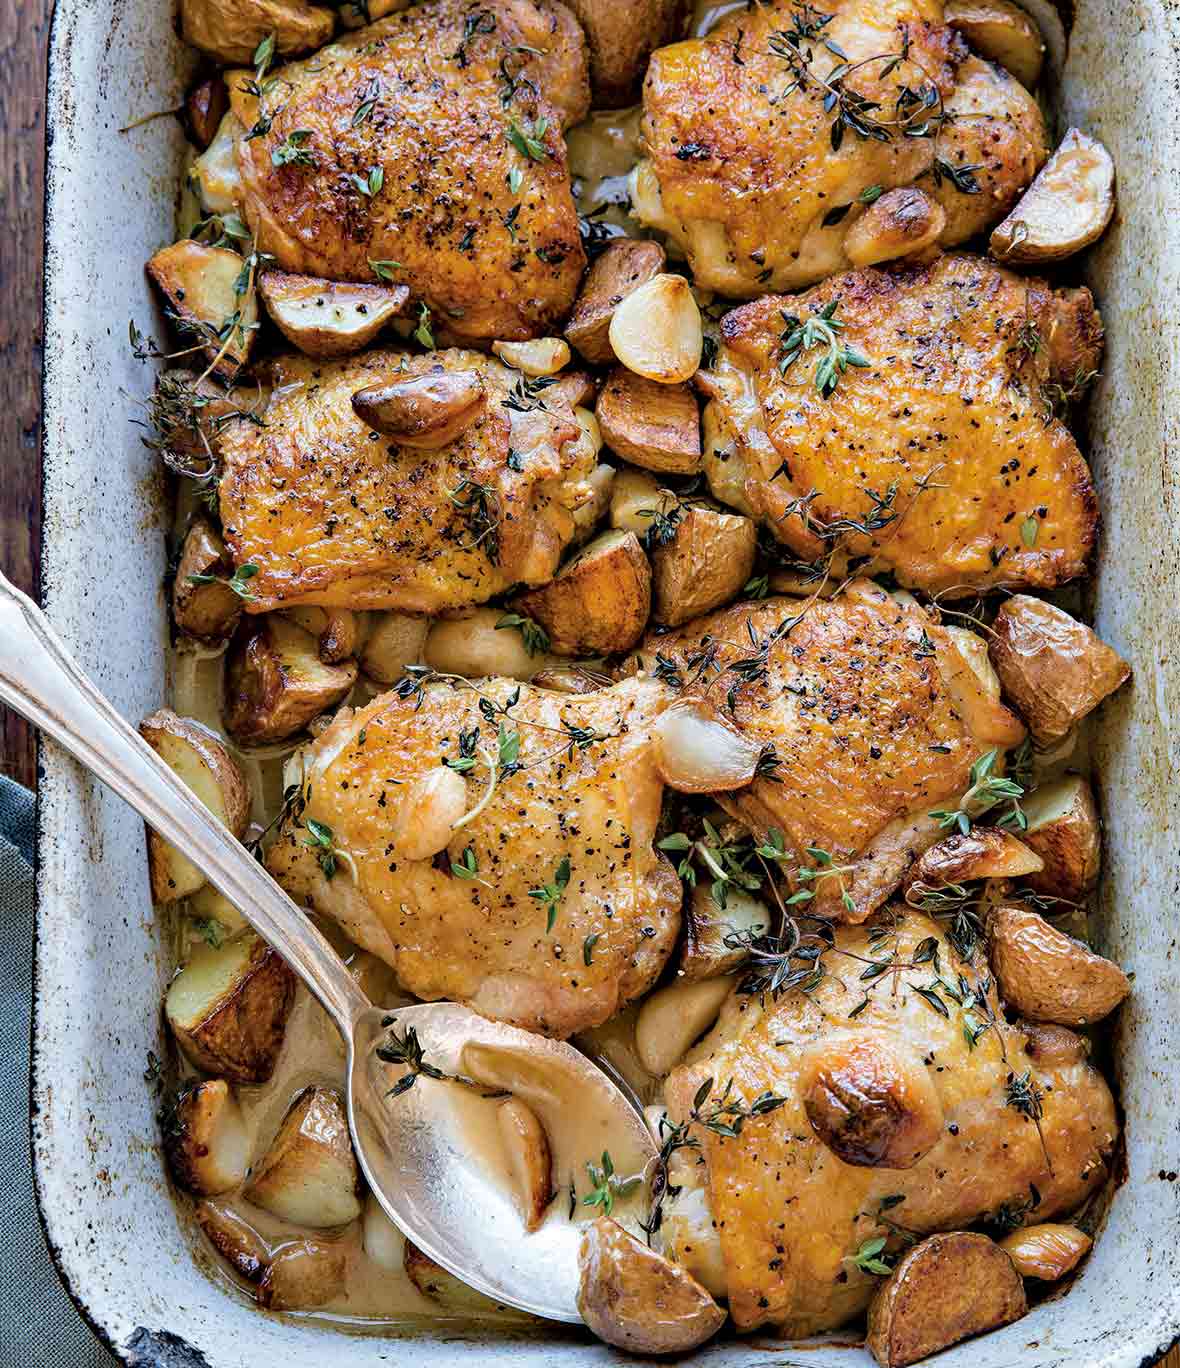 Cheap cuts: A baking dish with chicken thighs topped with garlic cloves, red potatoes, and thyme. A silver spoon is nestled in the dish.